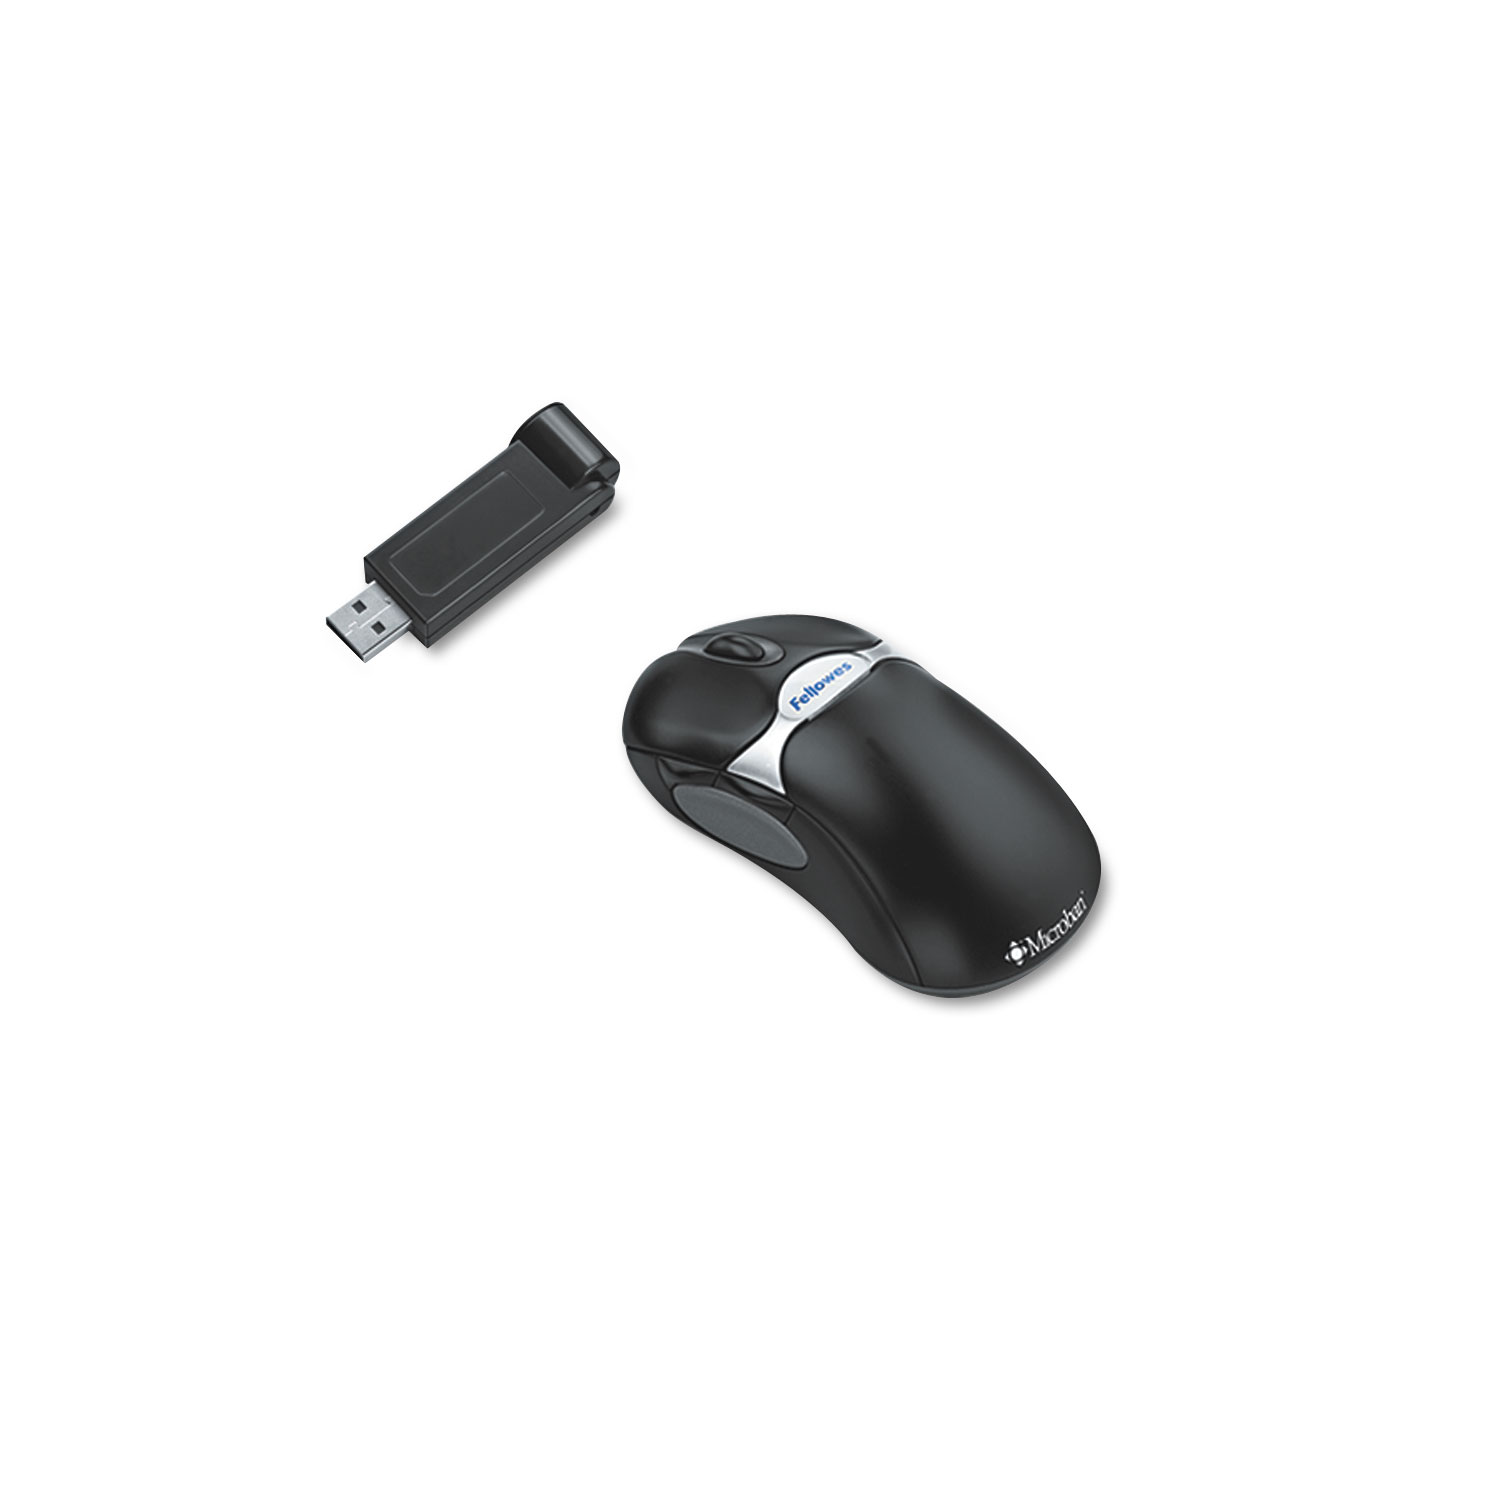 Microban Cordless Five-Button Optical Mouse, 2.4 GHz Frequency/19 ft Wireless Range, Left/Right Hand Use, Black/Silver